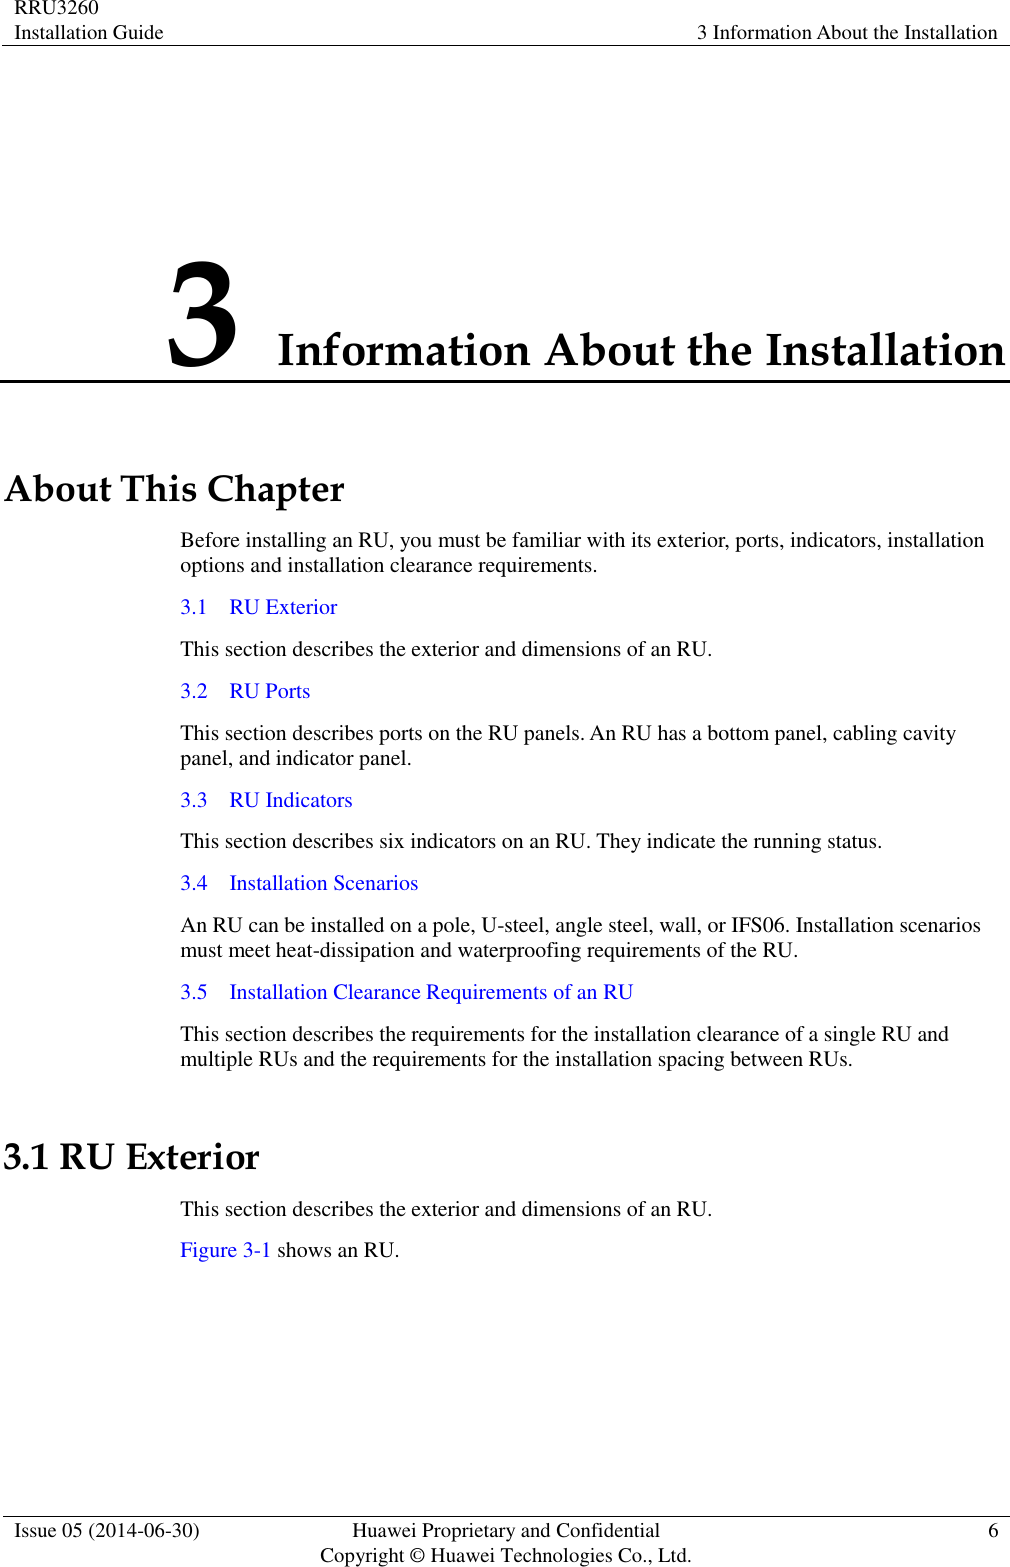 RRU3260 Installation Guide 3 Information About the Installation  Issue 05 (2014-06-30) Huawei Proprietary and Confidential                                     Copyright © Huawei Technologies Co., Ltd. 6  3 Information About the Installation About This Chapter Before installing an RU, you must be familiar with its exterior, ports, indicators, installation options and installation clearance requirements. 3.1    RU Exterior This section describes the exterior and dimensions of an RU. 3.2    RU Ports This section describes ports on the RU panels. An RU has a bottom panel, cabling cavity panel, and indicator panel. 3.3    RU Indicators This section describes six indicators on an RU. They indicate the running status.   3.4    Installation Scenarios An RU can be installed on a pole, U-steel, angle steel, wall, or IFS06. Installation scenarios must meet heat-dissipation and waterproofing requirements of the RU. 3.5    Installation Clearance Requirements of an RU This section describes the requirements for the installation clearance of a single RU and multiple RUs and the requirements for the installation spacing between RUs. 3.1 RU Exterior This section describes the exterior and dimensions of an RU. Figure 3-1 shows an RU.   